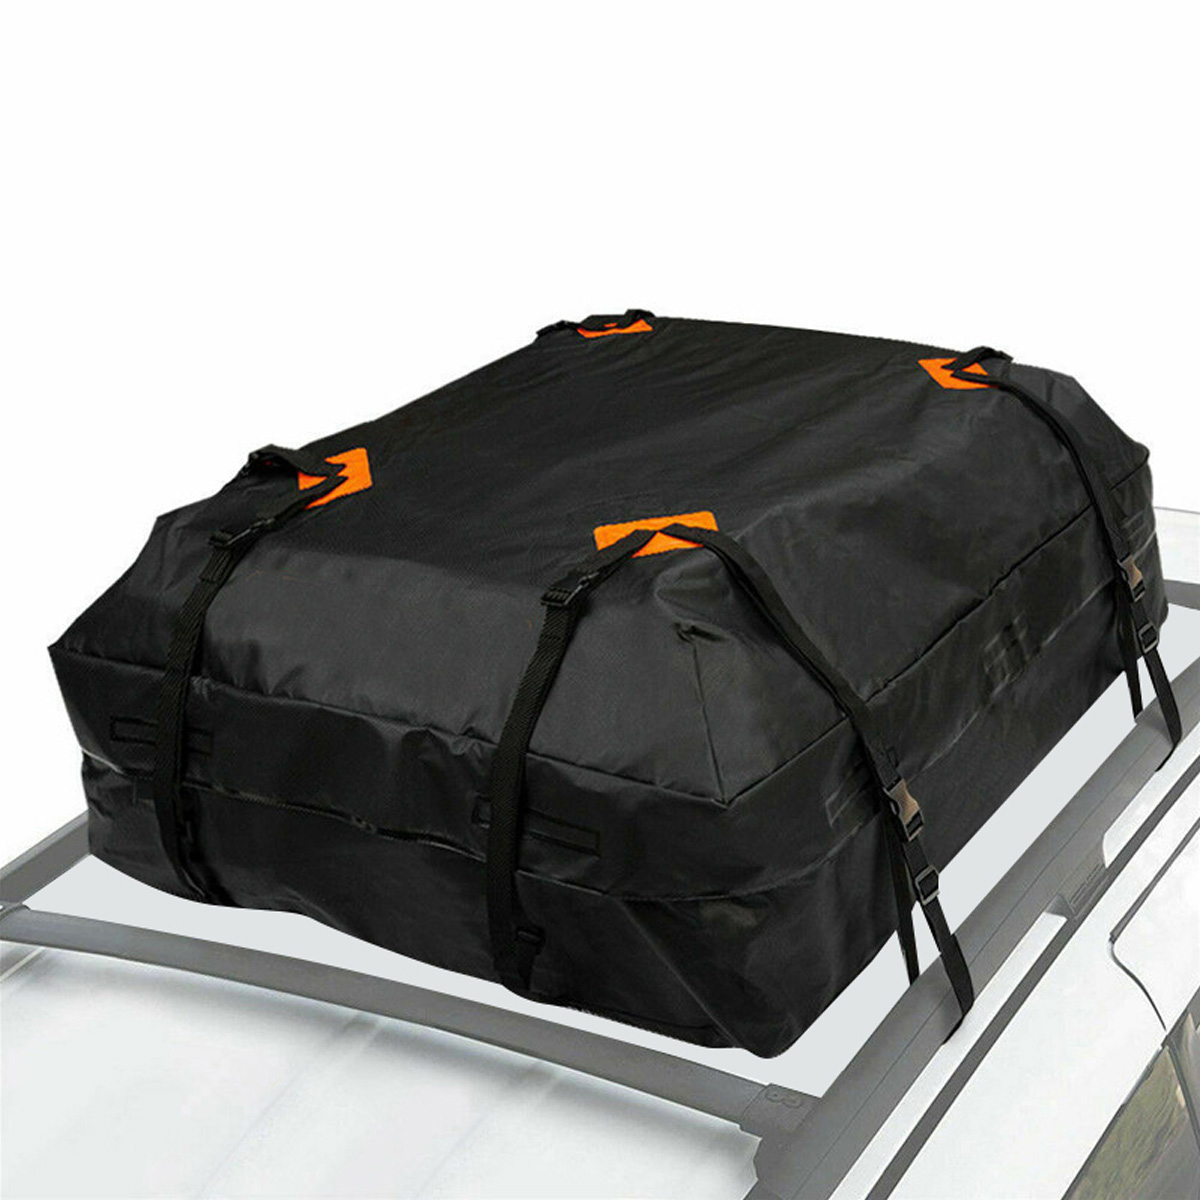 475L-Car-Rooftop-Cargo-Bag-420D-Waterproof-Car-Top-Carrier-Bag-Luggage-Storage-for-Outdoor-Travel-Ca-1888699-10